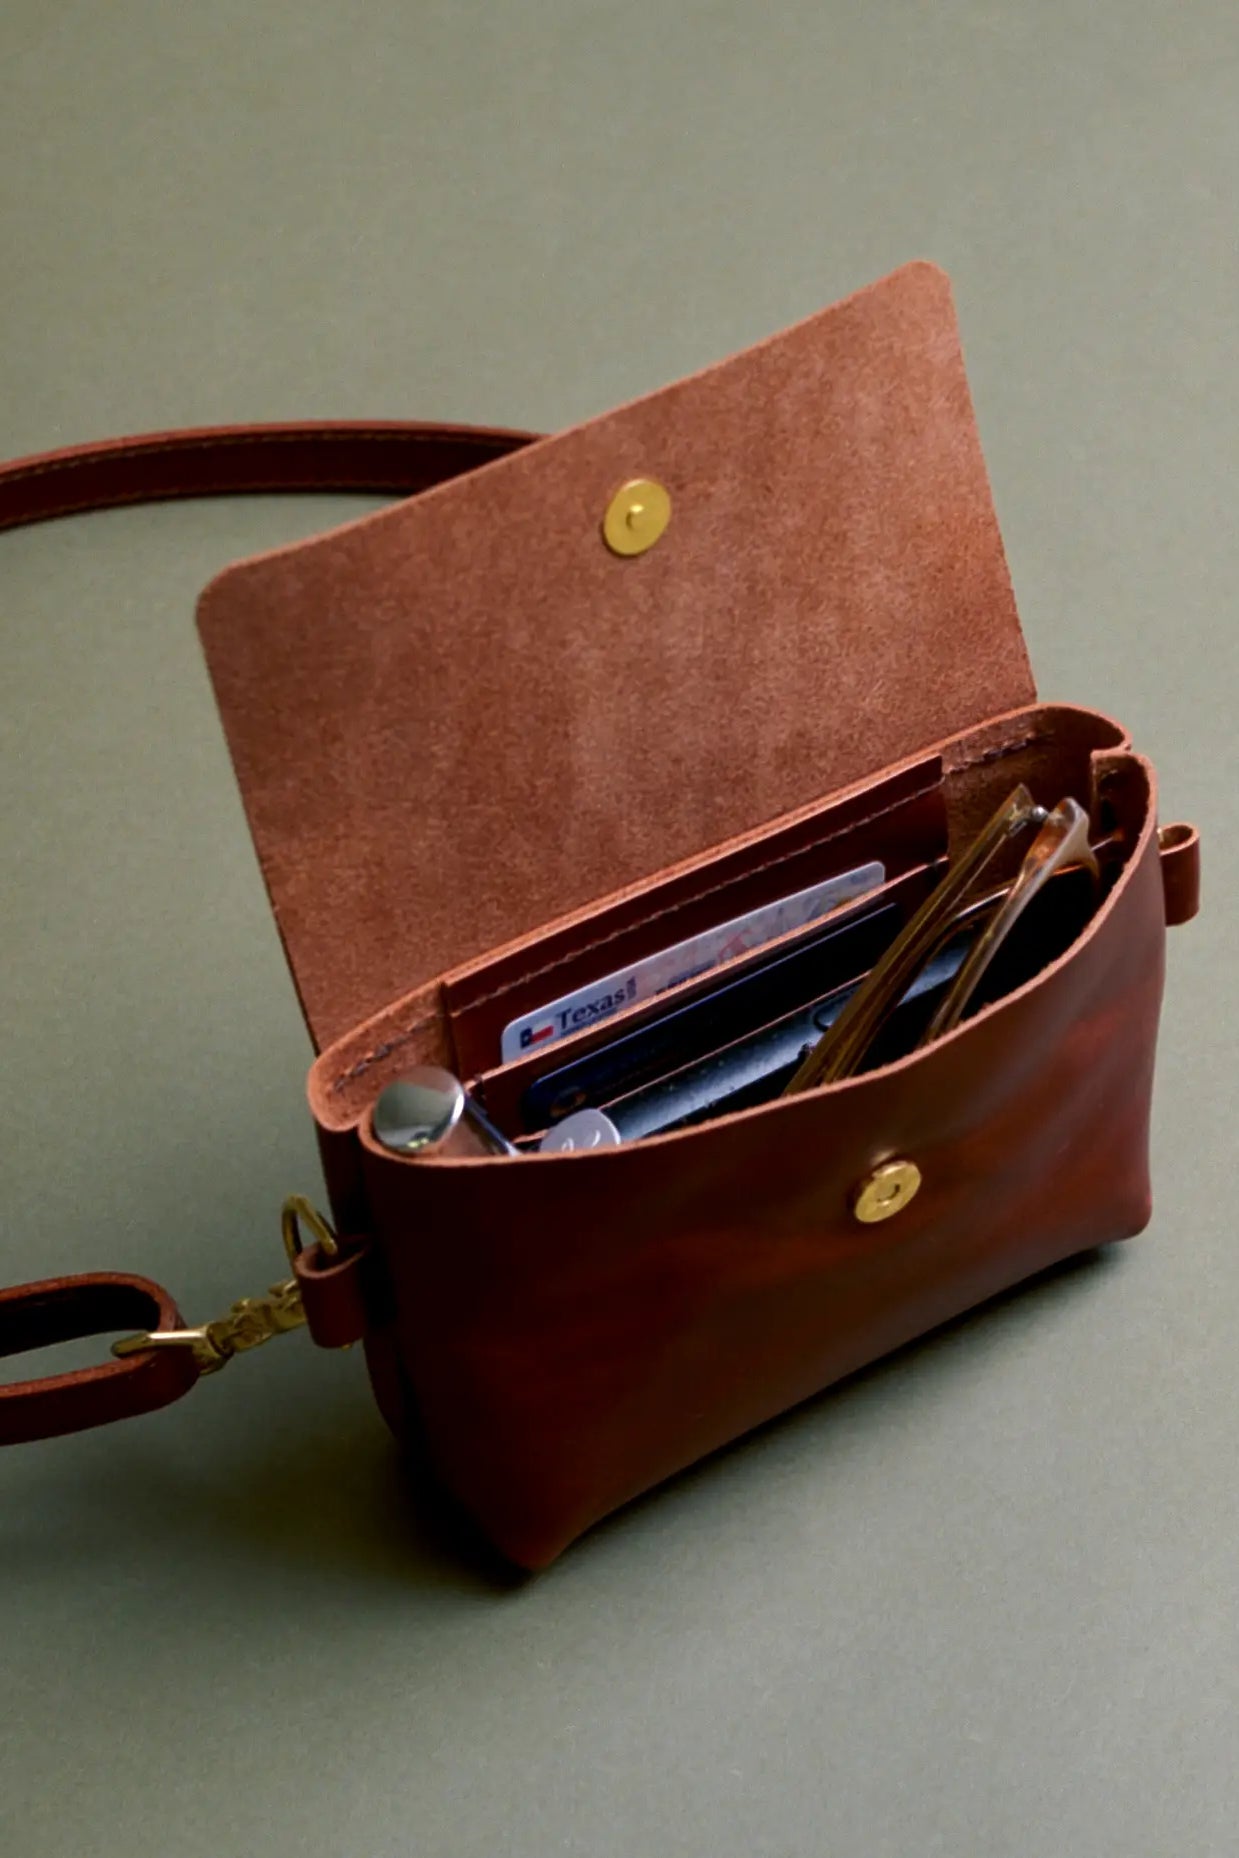 WEATHER & STORY - Cognac Brown Vegetable Tanned Smooth Leather Sling Bag with Brass Hardware - Handmade in Austin, Texas, USA